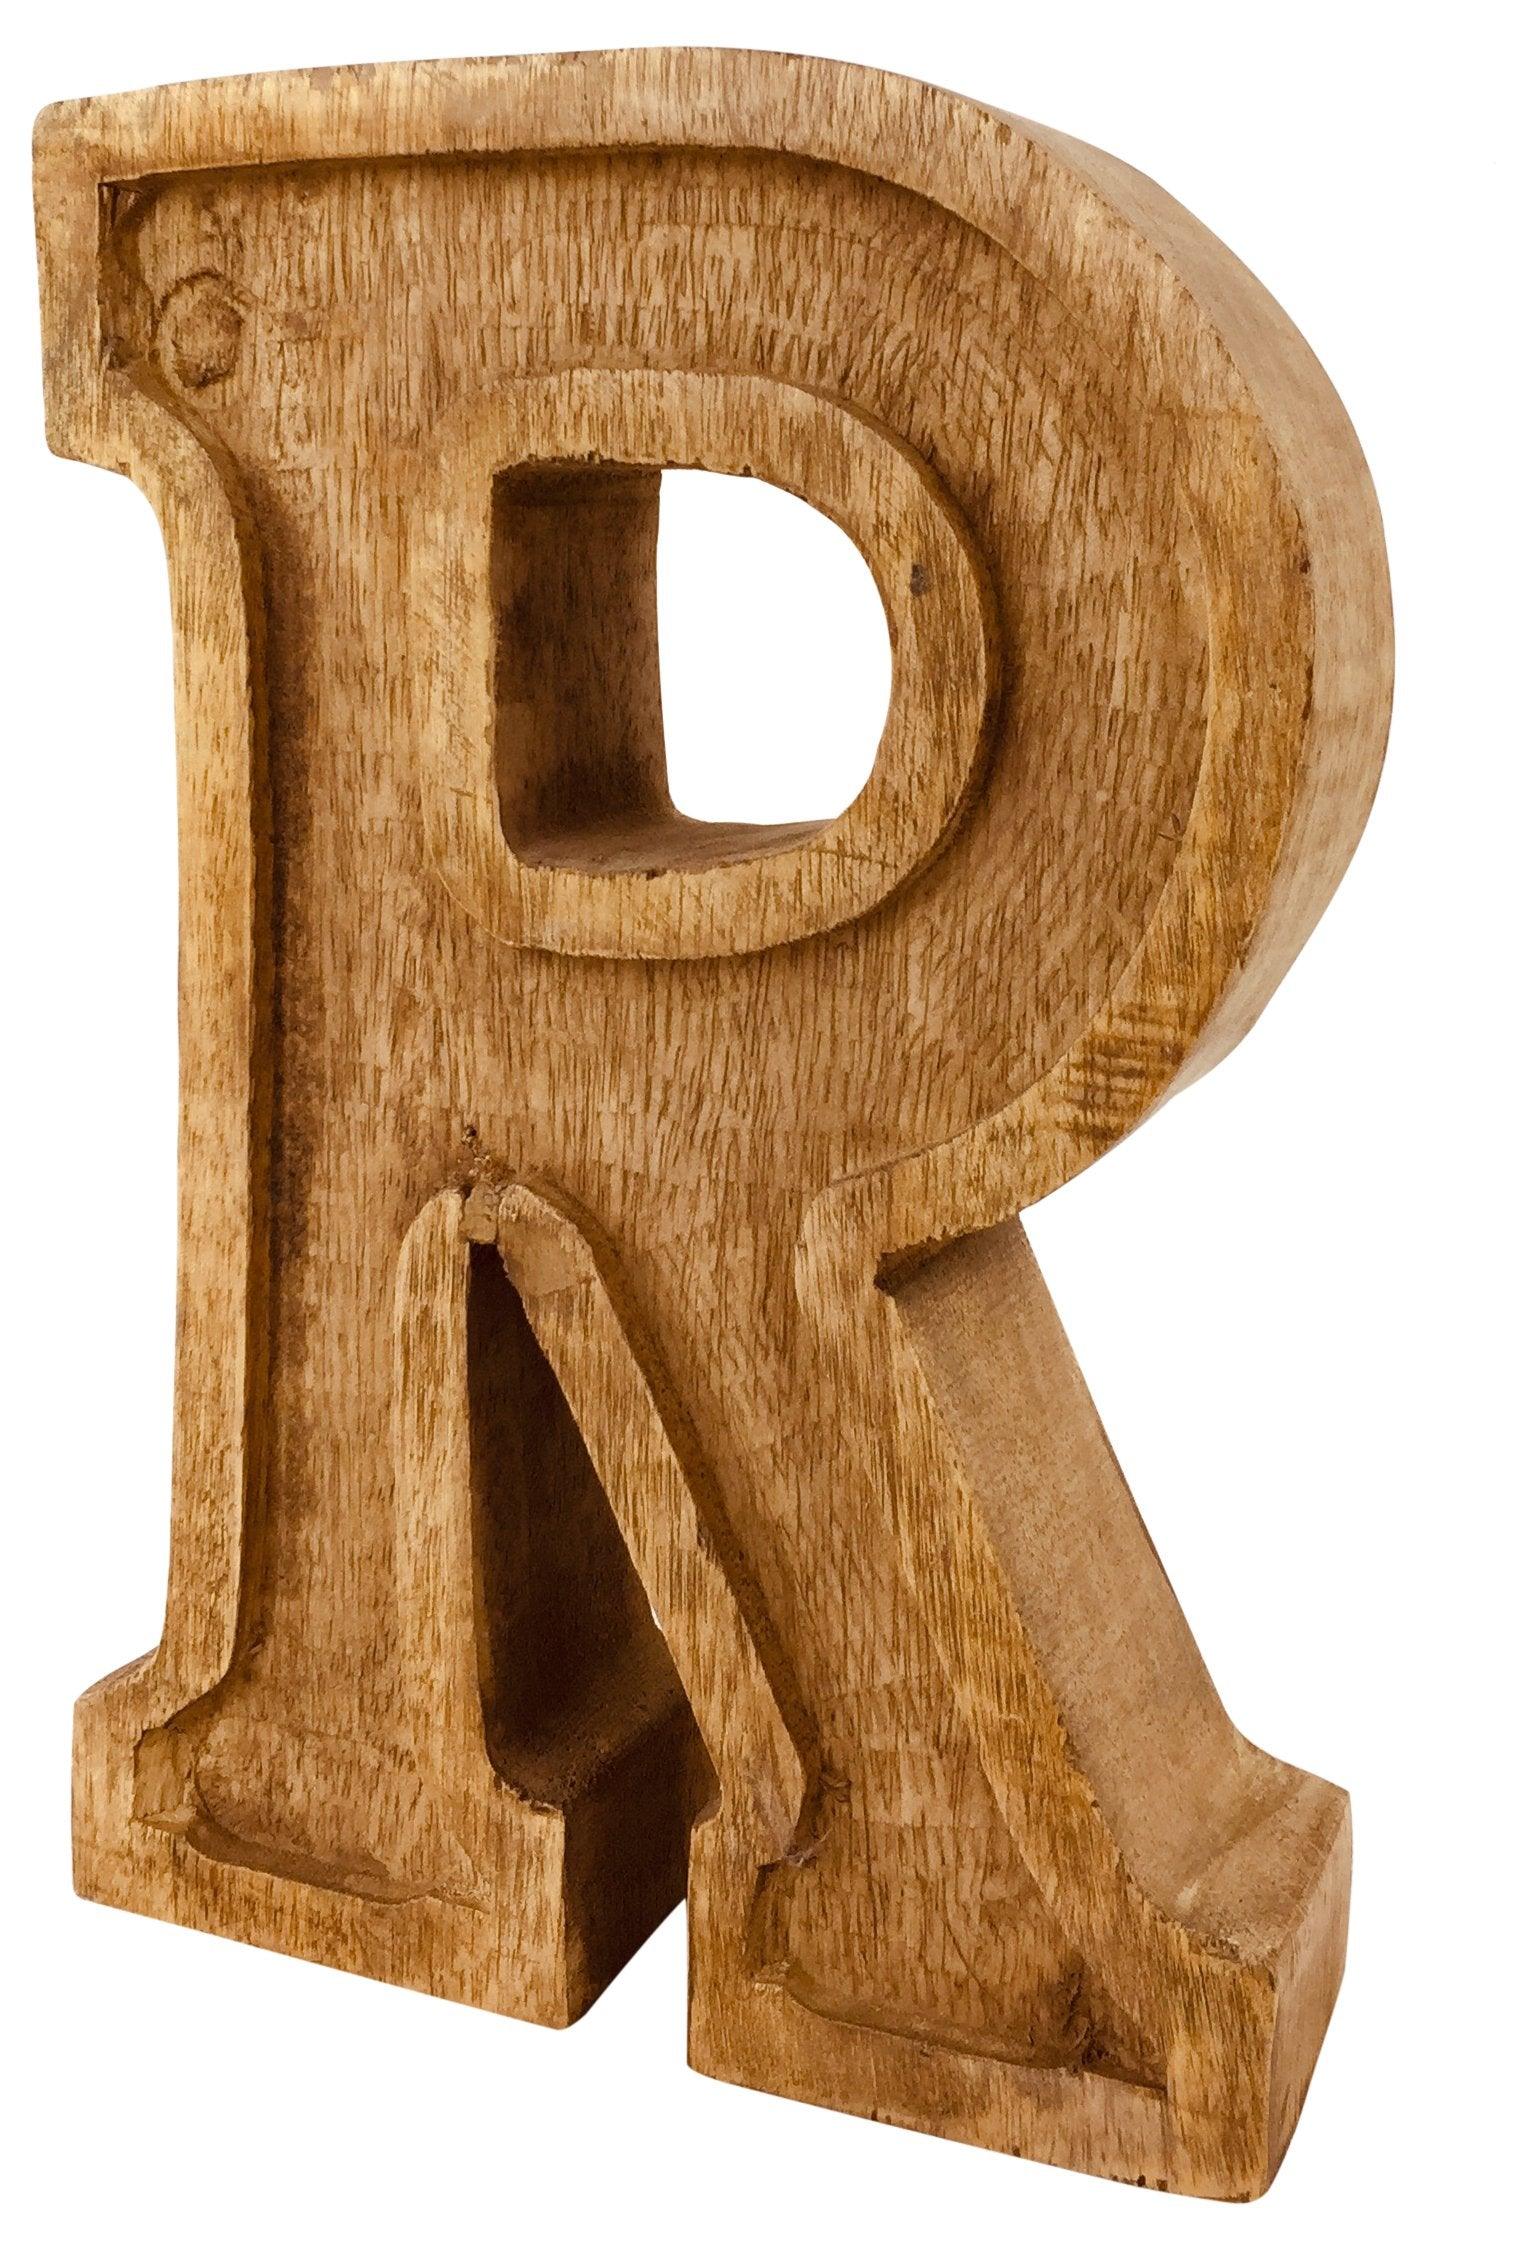 Hand Carved Wooden Embossed Letter R - £18.99 - Single Letters 